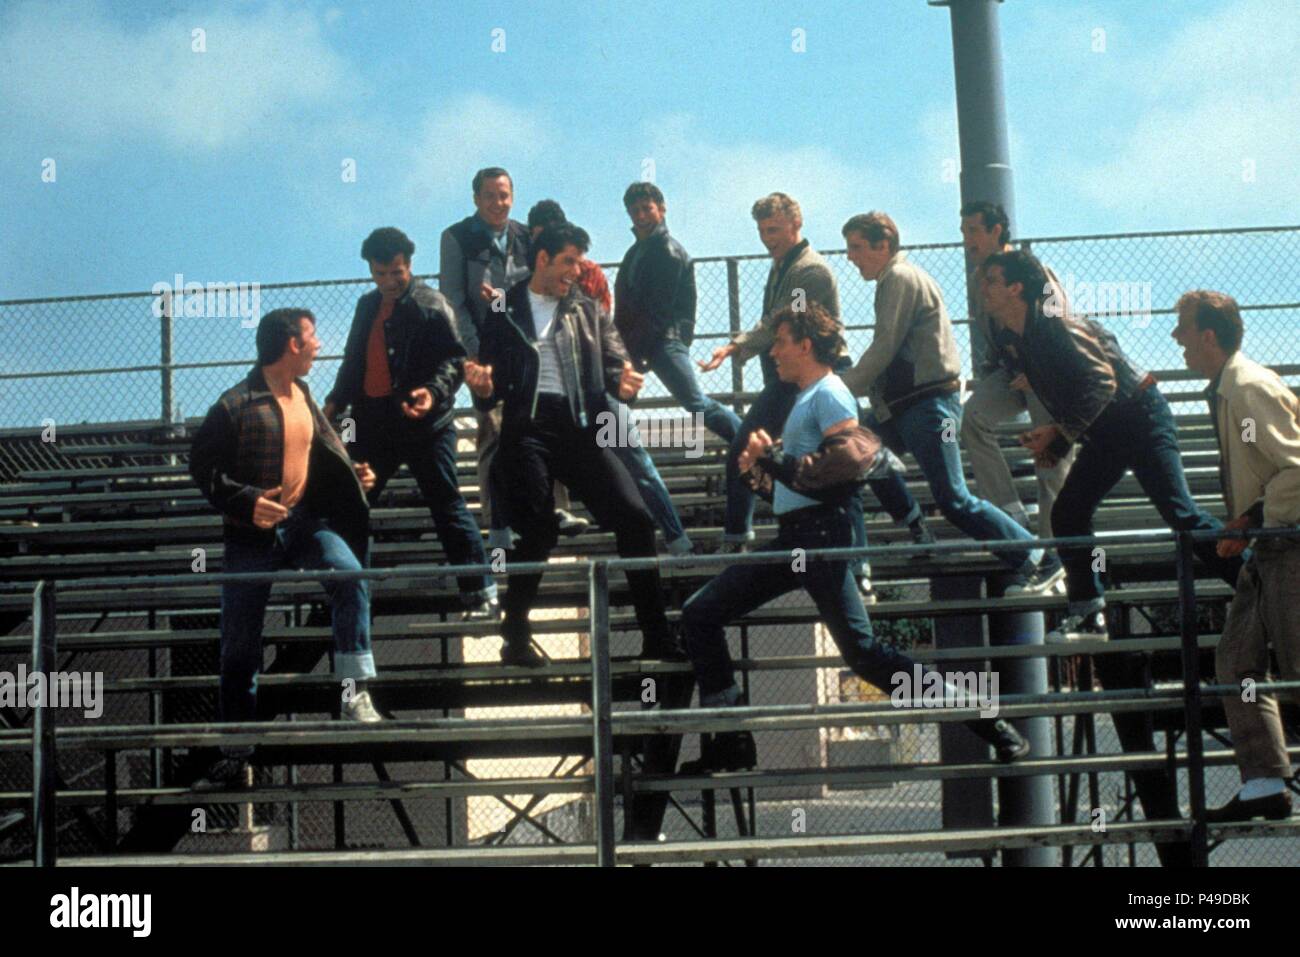 Original Film Title: GREASE.  English Title: GREASE.  Film Director: RANDAL KLEISER.  Year: 1978.  Stars: JOHN TRAVOLTA; KELLY WARD; MICHAEL TUCCI; BARRY PEARL; JEFF CONAWAY. Credit: PARAMOUNT PICTURES / Album Stock Photo